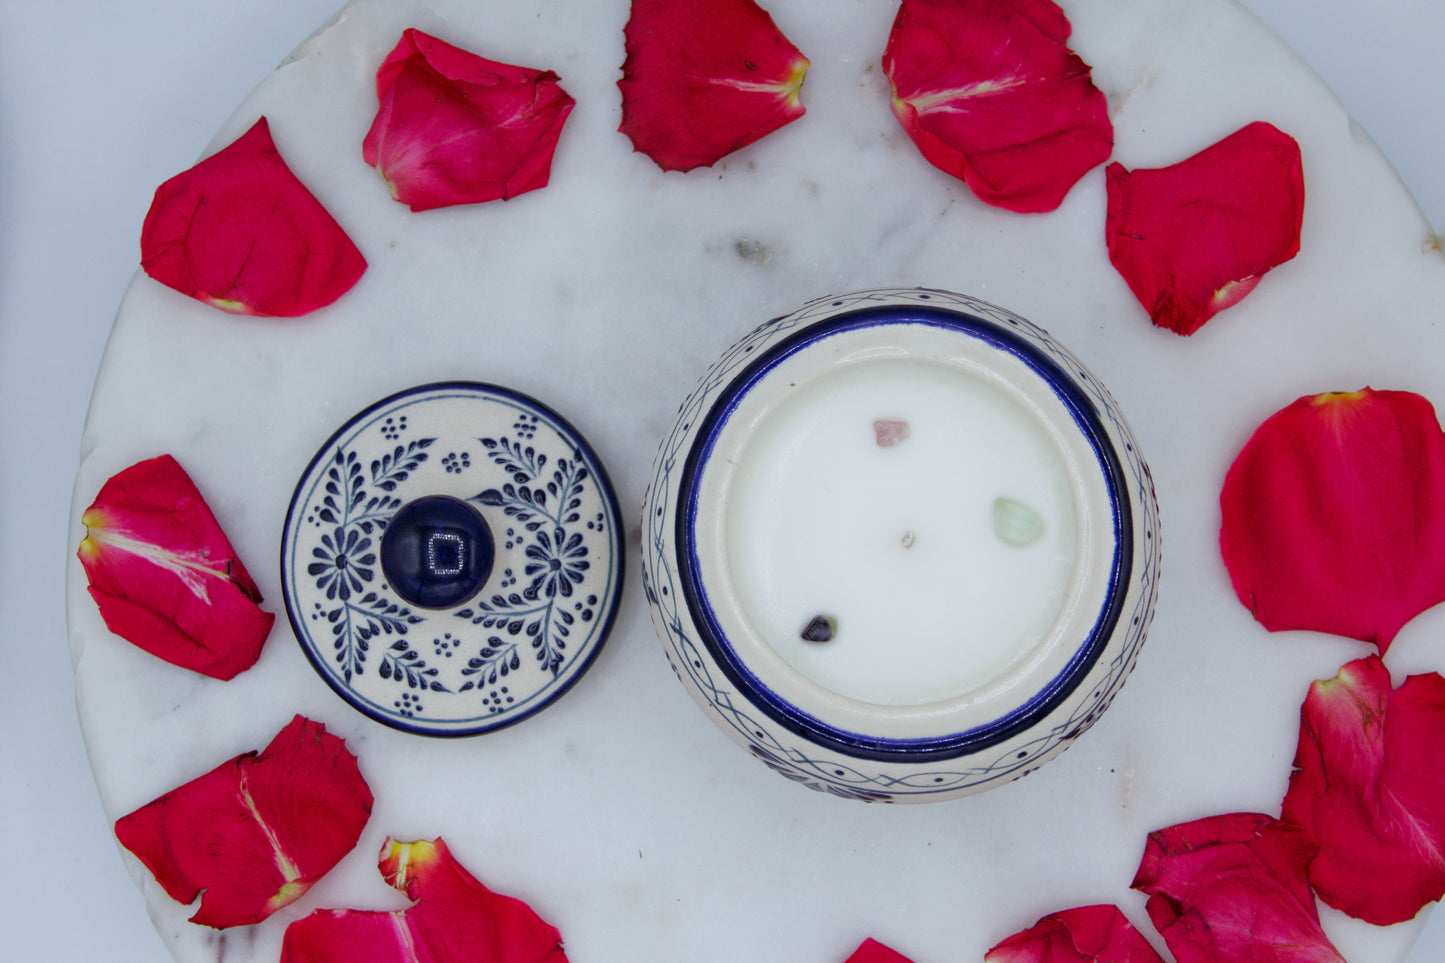 Top view of the handmade artisanal candle in a red floral design talavera with an open lid on its side. Custom made by Artisan in Mexico. 100% All Natural Soy Candle. Reuse the talavera as home decor or storage.